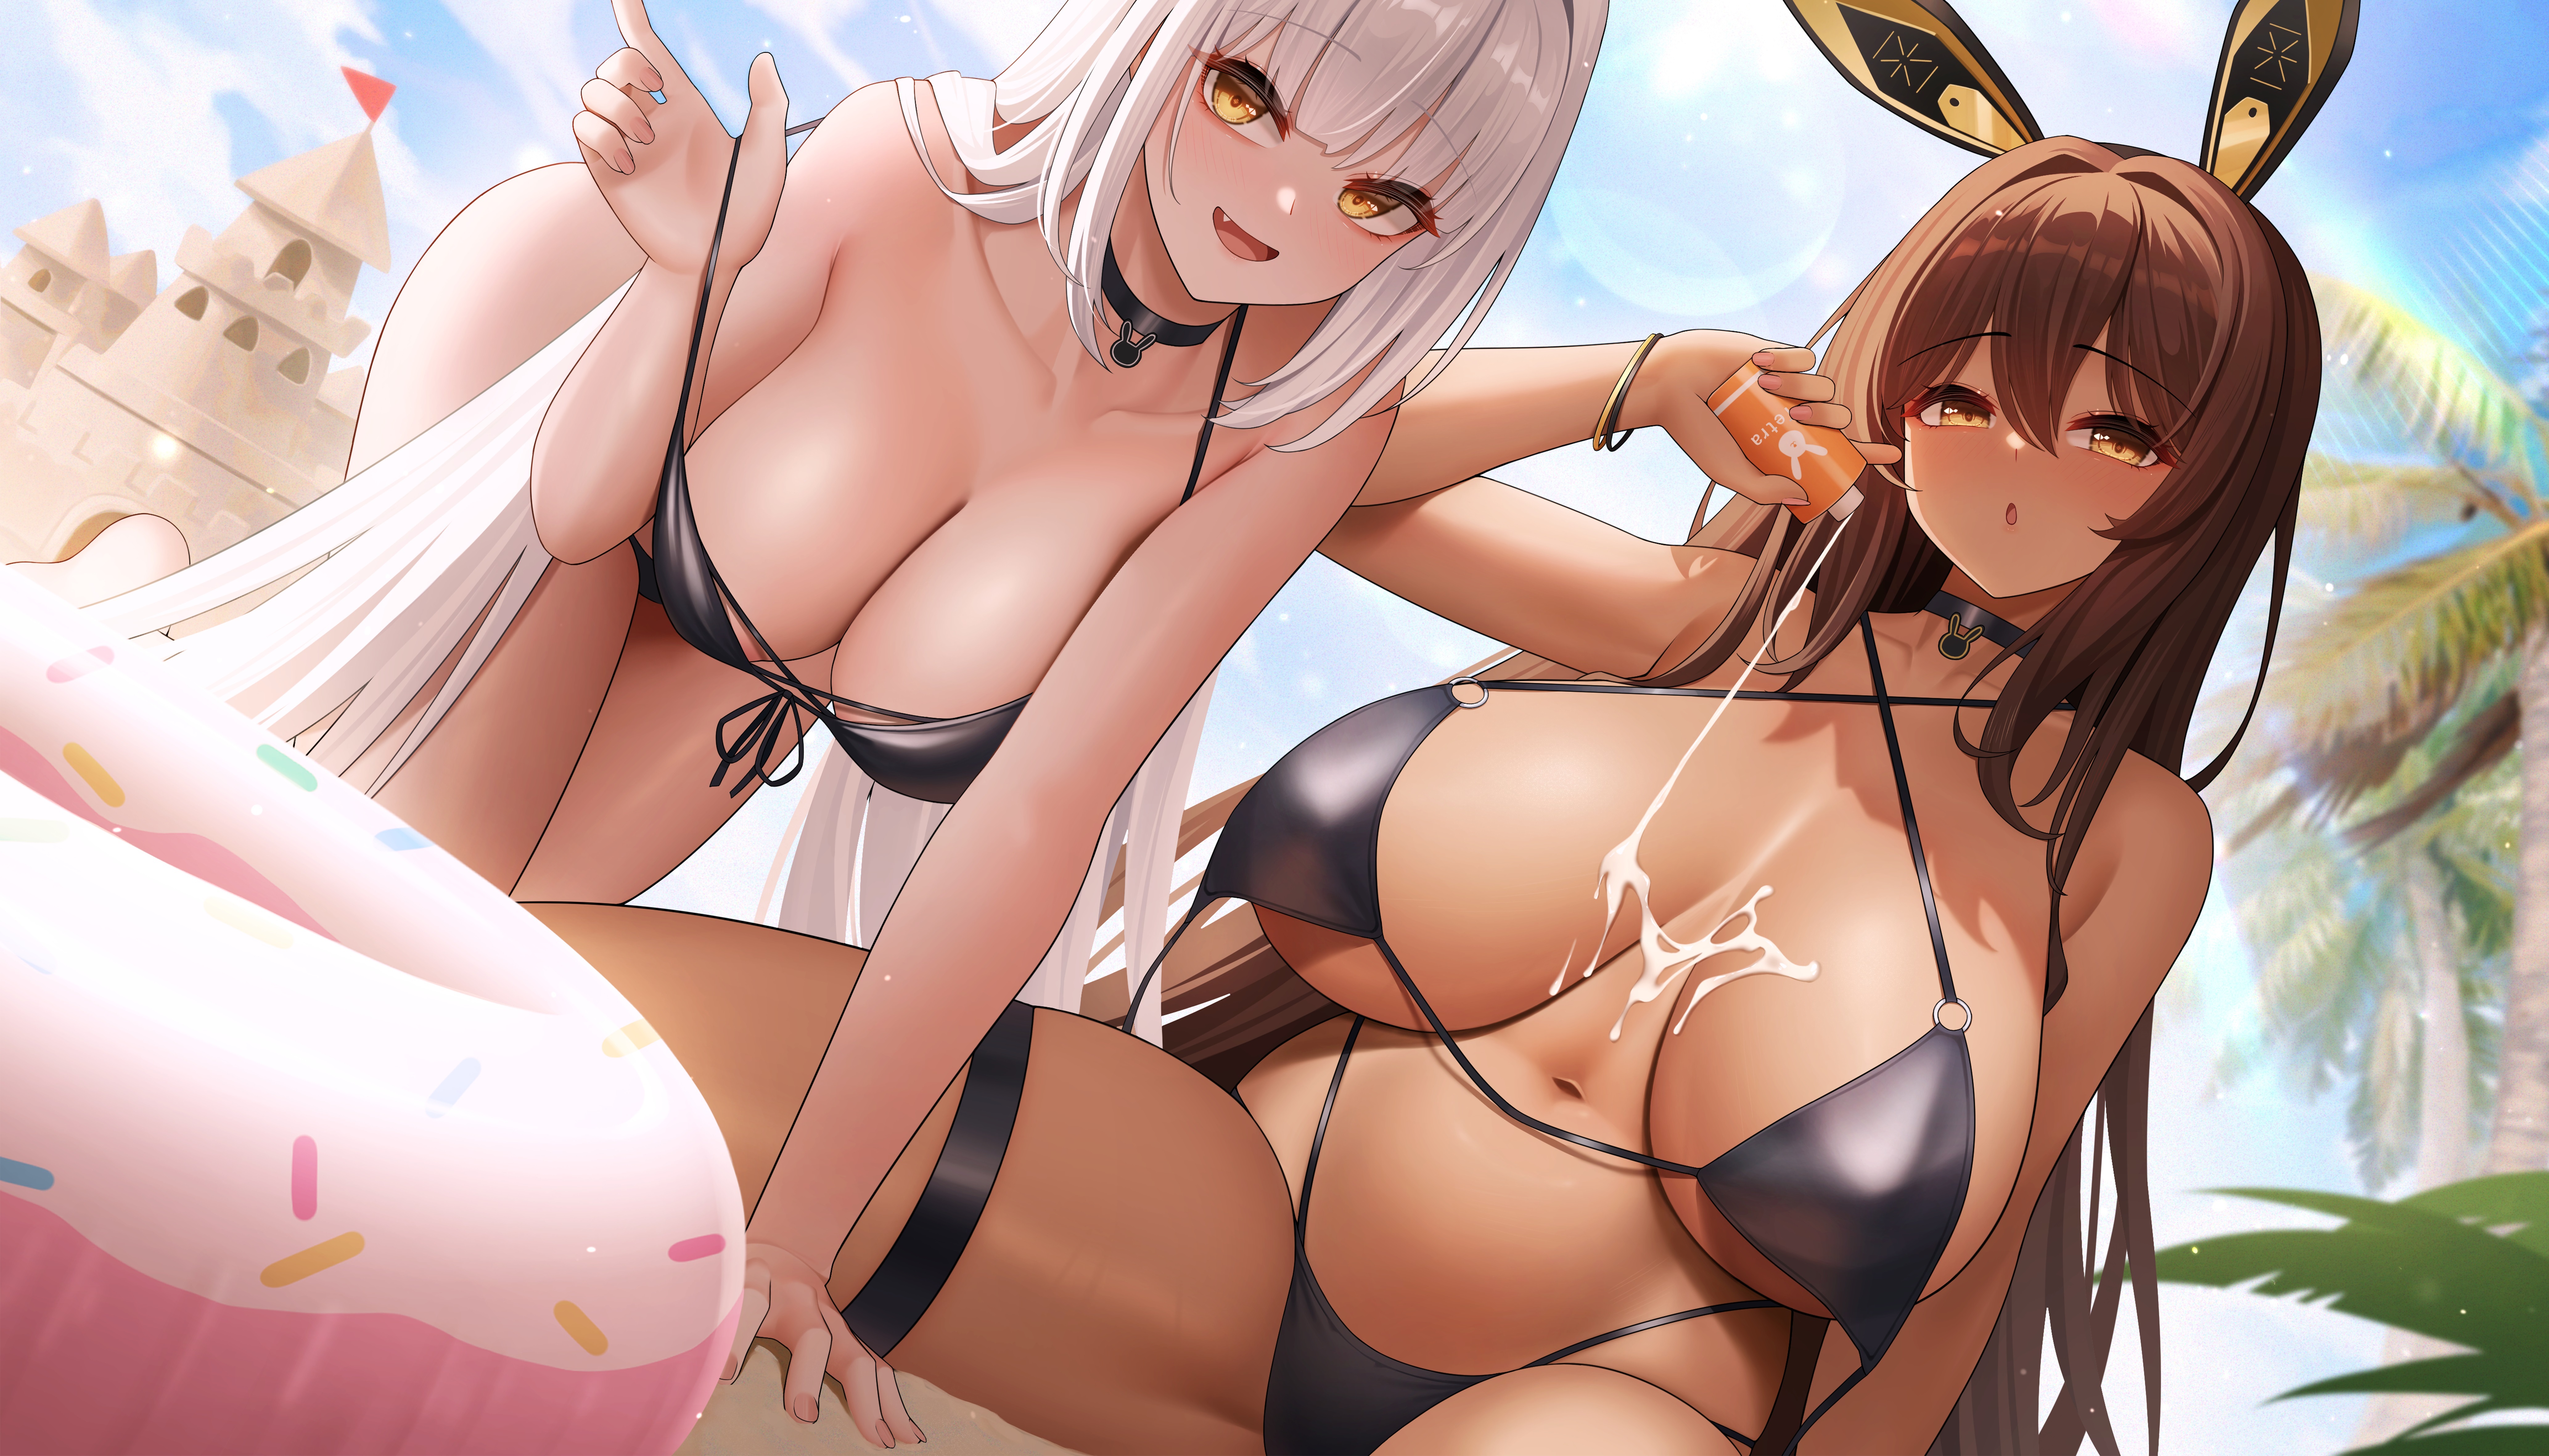 Anime 8268x4724 anime anime girls Pixiv bikini Nikke: The Goddess of Victory Blanche (Nikke) Noir (Nikke) spread legs bent over thigh band thigh strap leg ring huge breasts big boobs hanging boobs long hair straight hair sunscreen skin lotion lotion collar belly button strap falling off shoulder